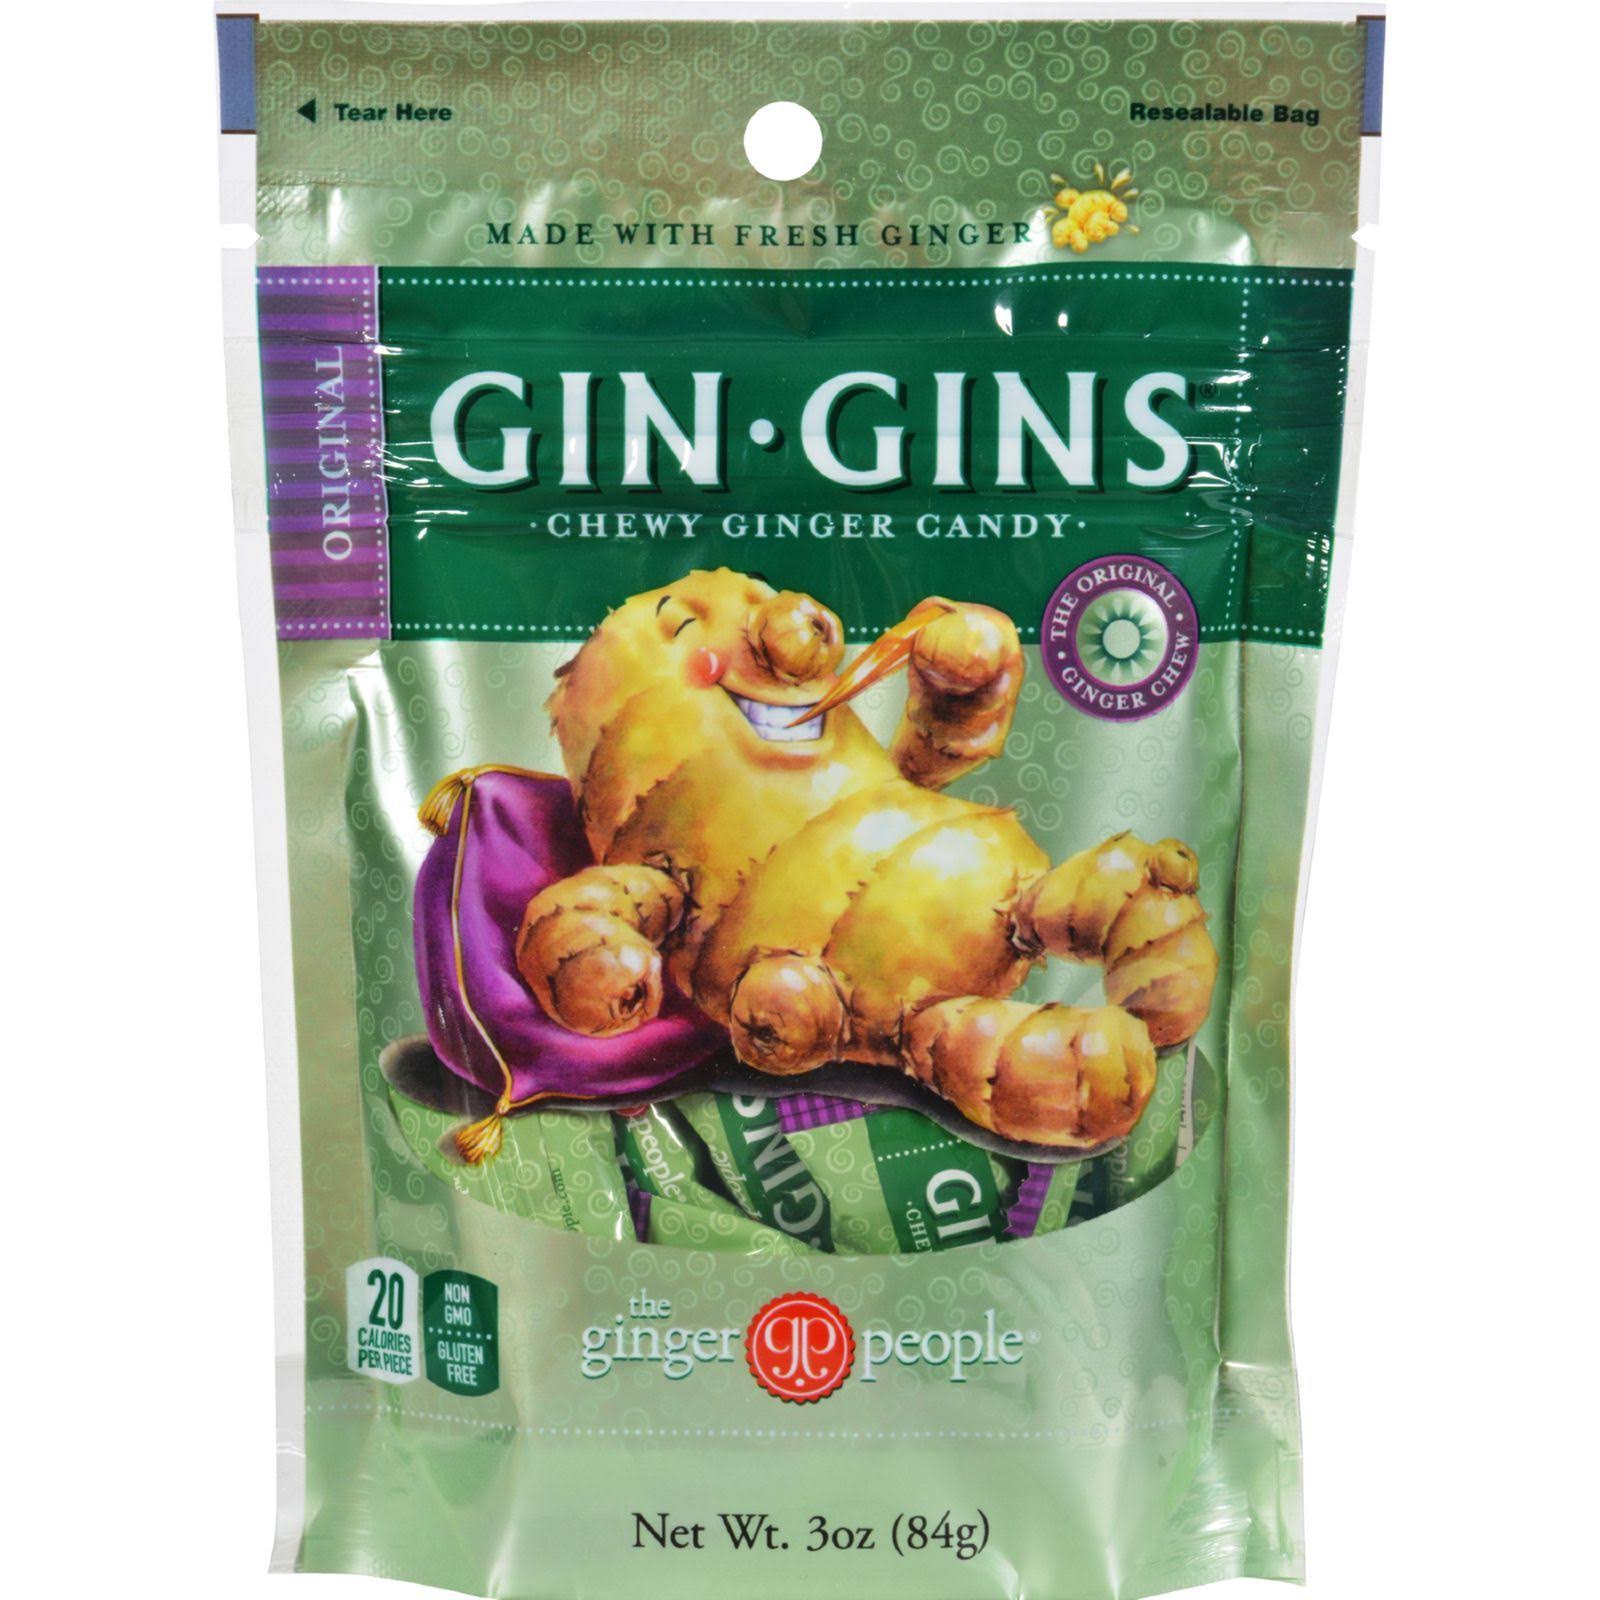 Gin Gins Chewy Ginger Candy - Original, 3.0oz